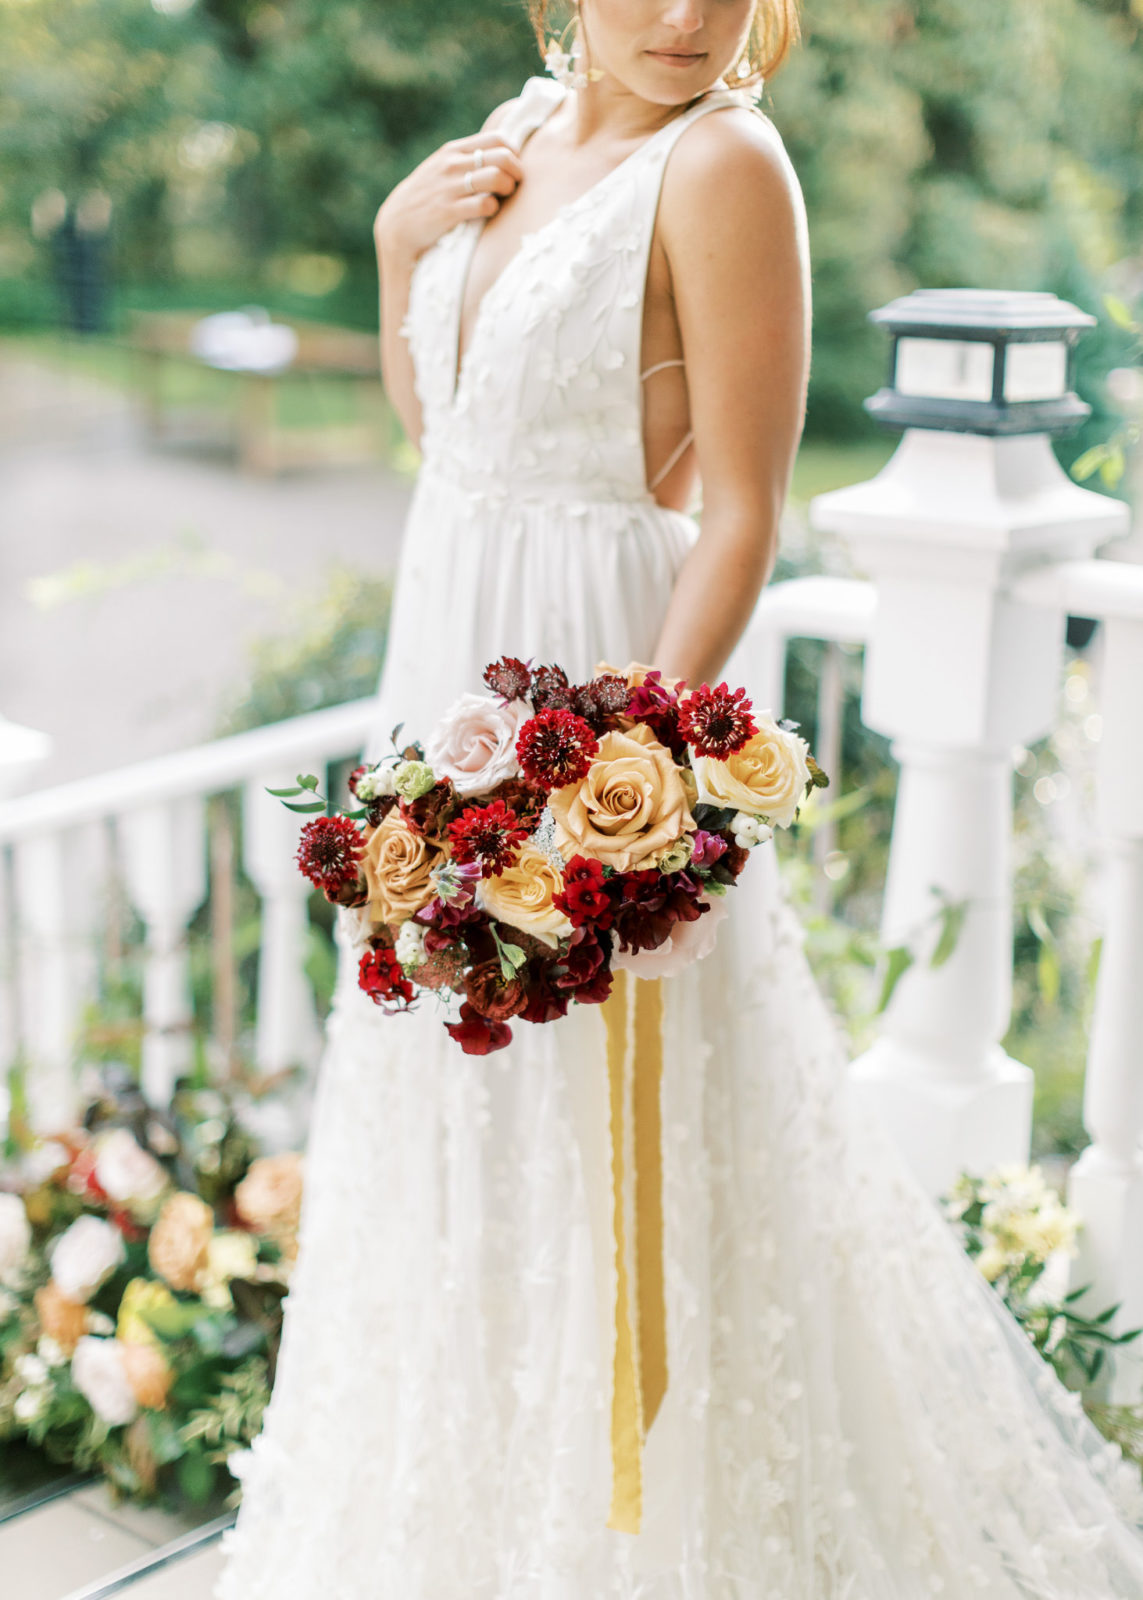 Enchanting Estate Wedding Inspiration With Berry Hues and Honey Accents - featured on the Bronte Bride Blog